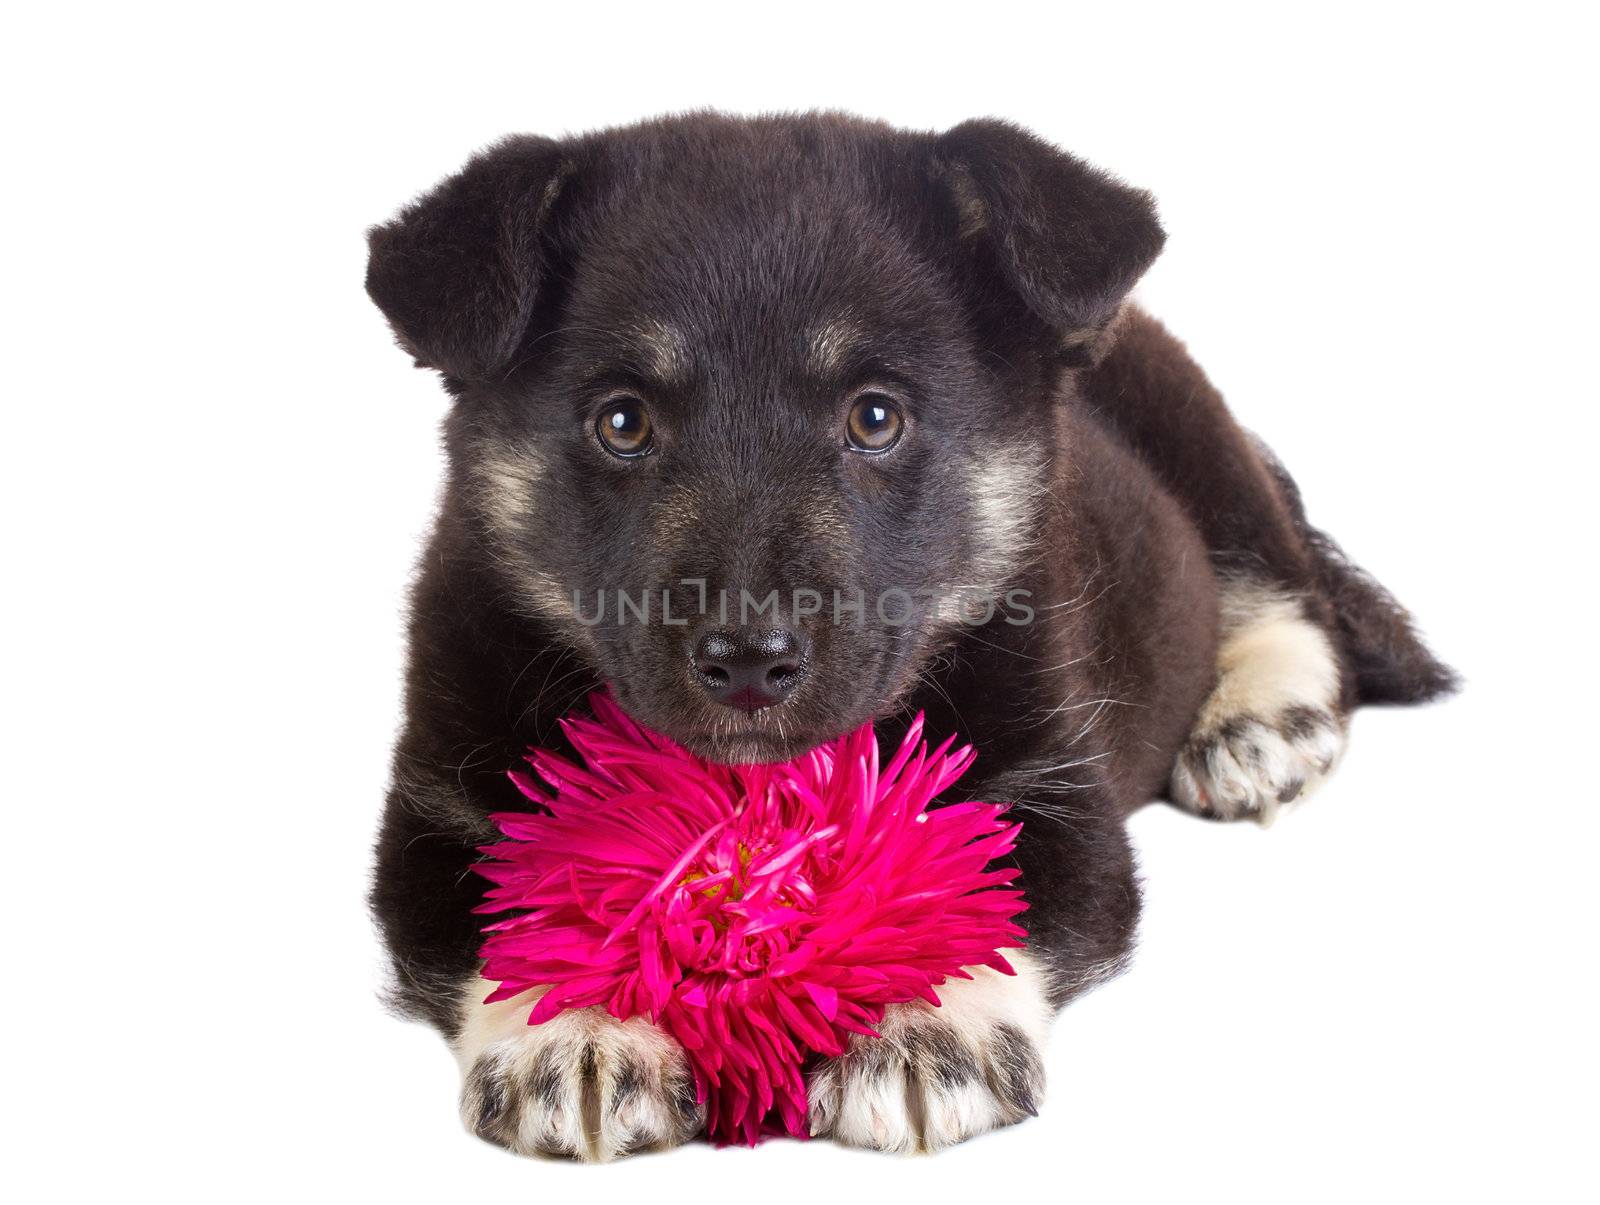 puppy holding flower by Alekcey